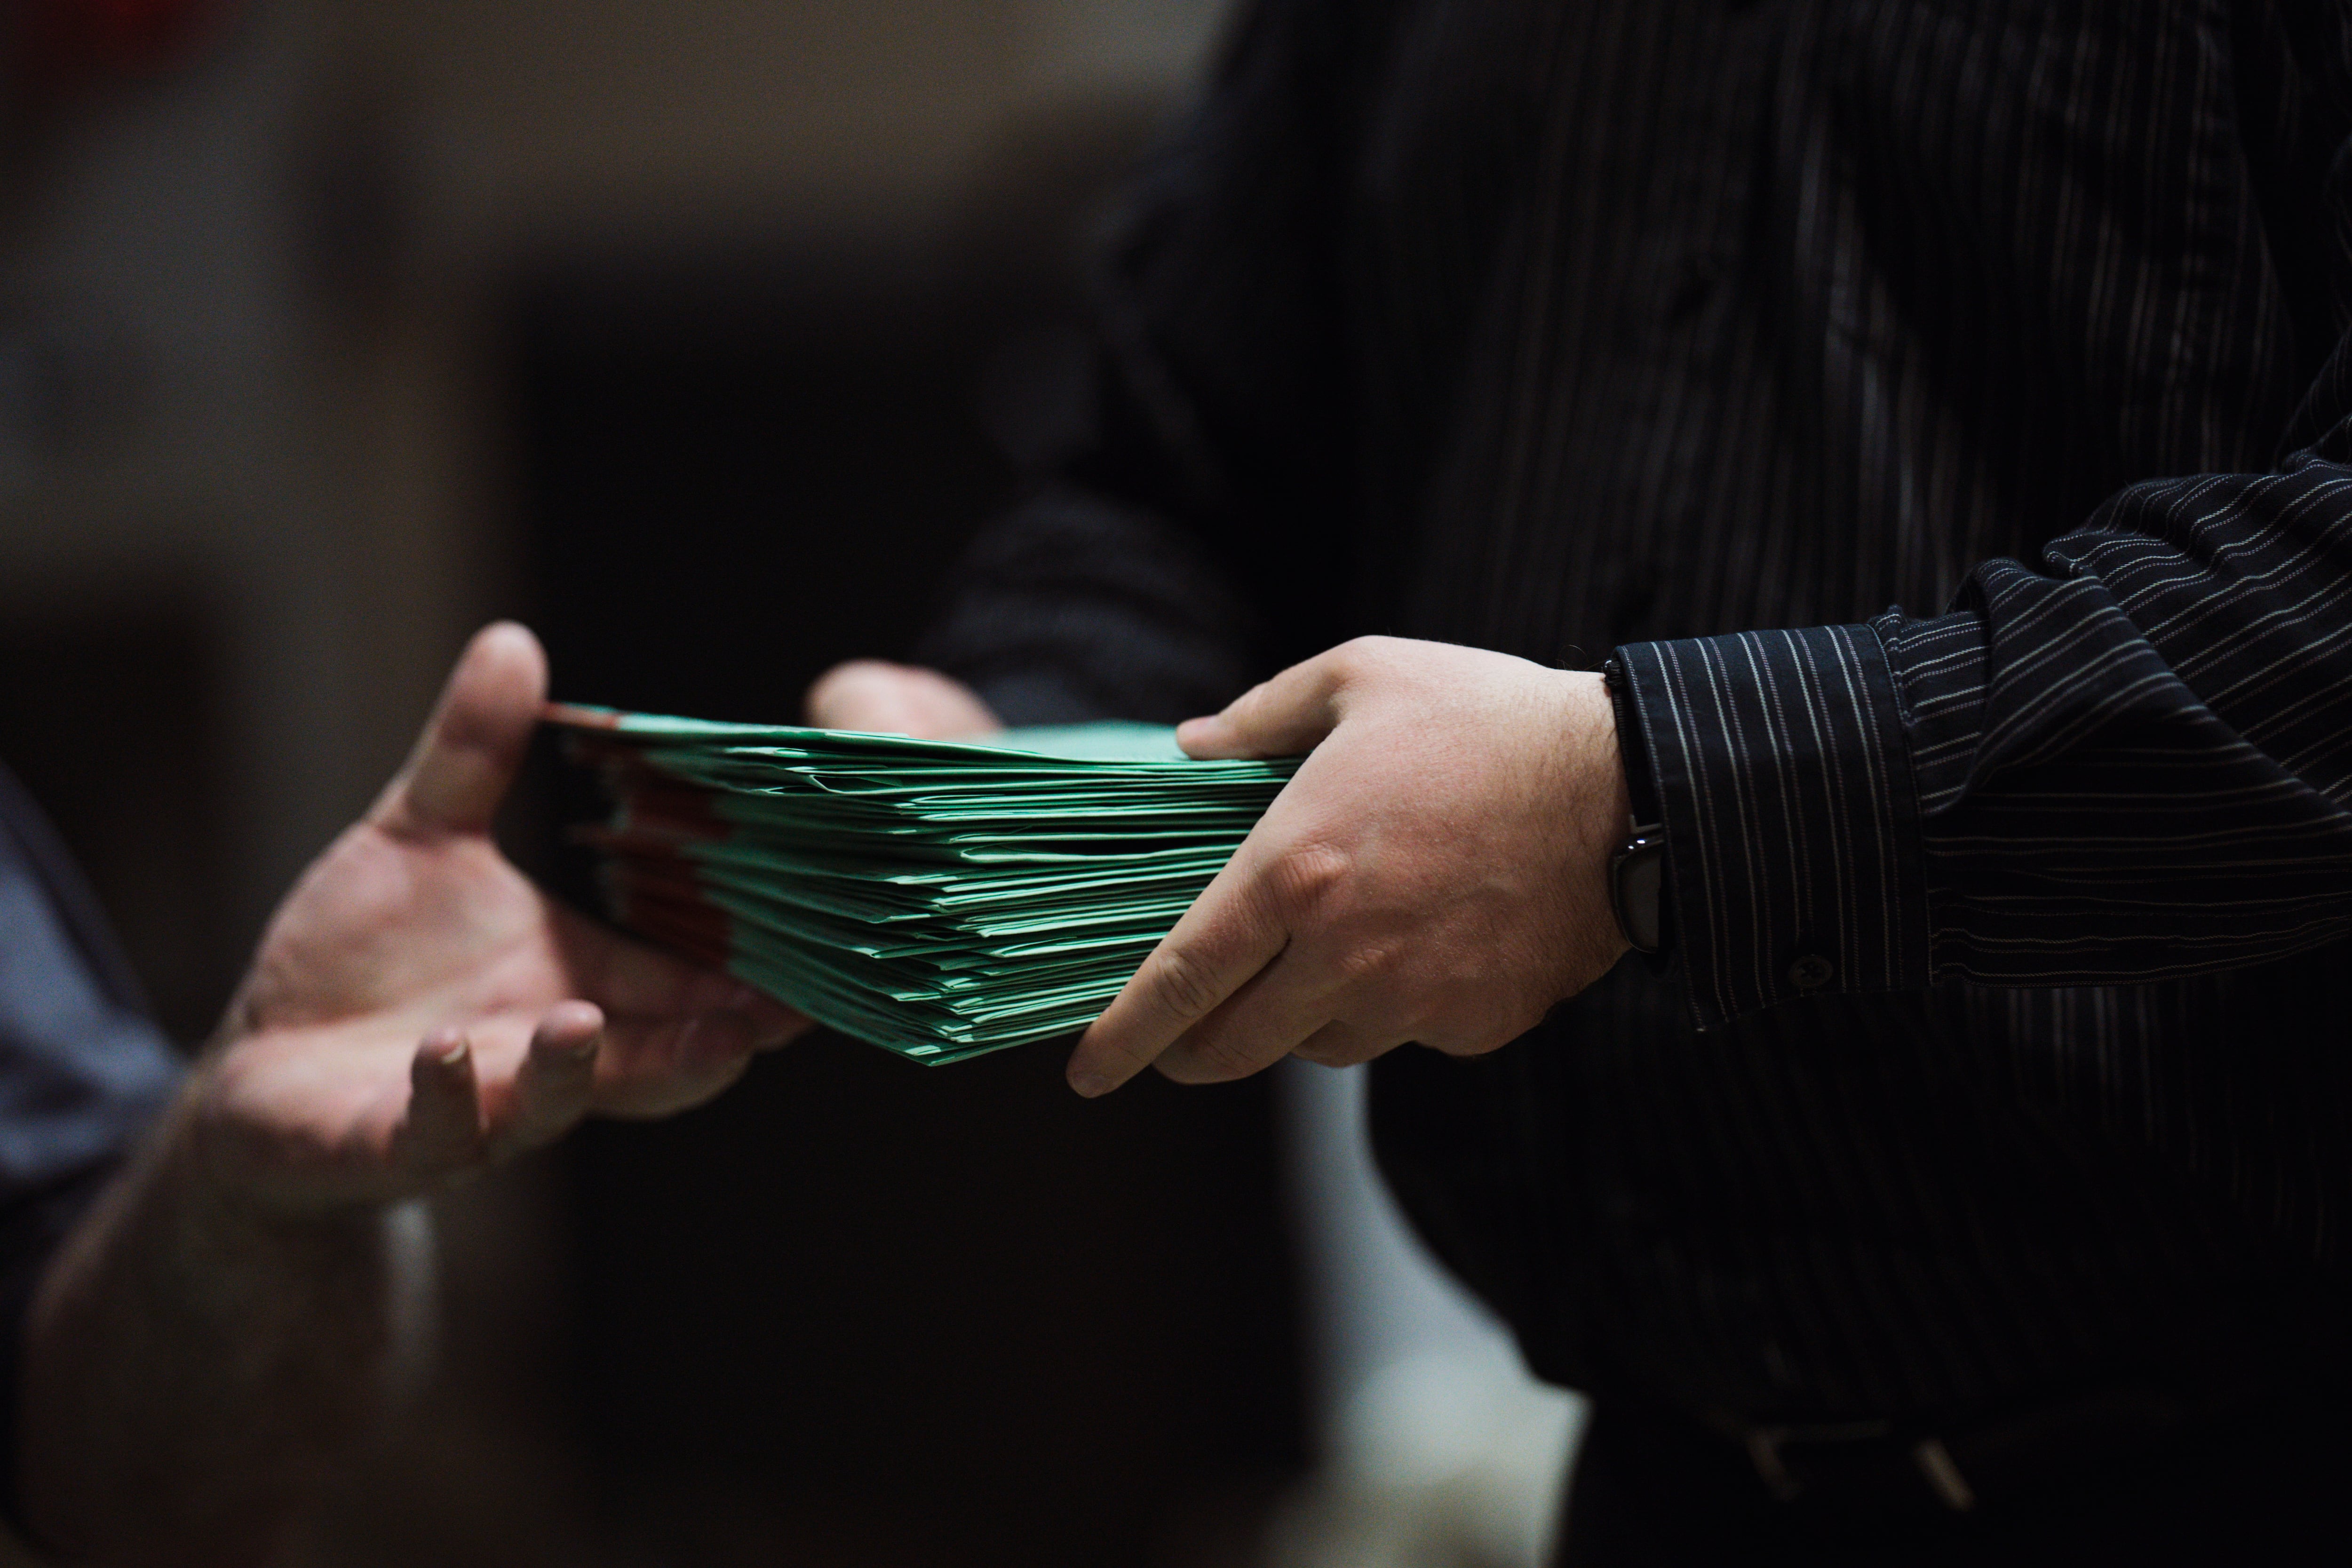 A closeup of a man's hands filled with a stack of green envelopes, passing them to another man's hand.